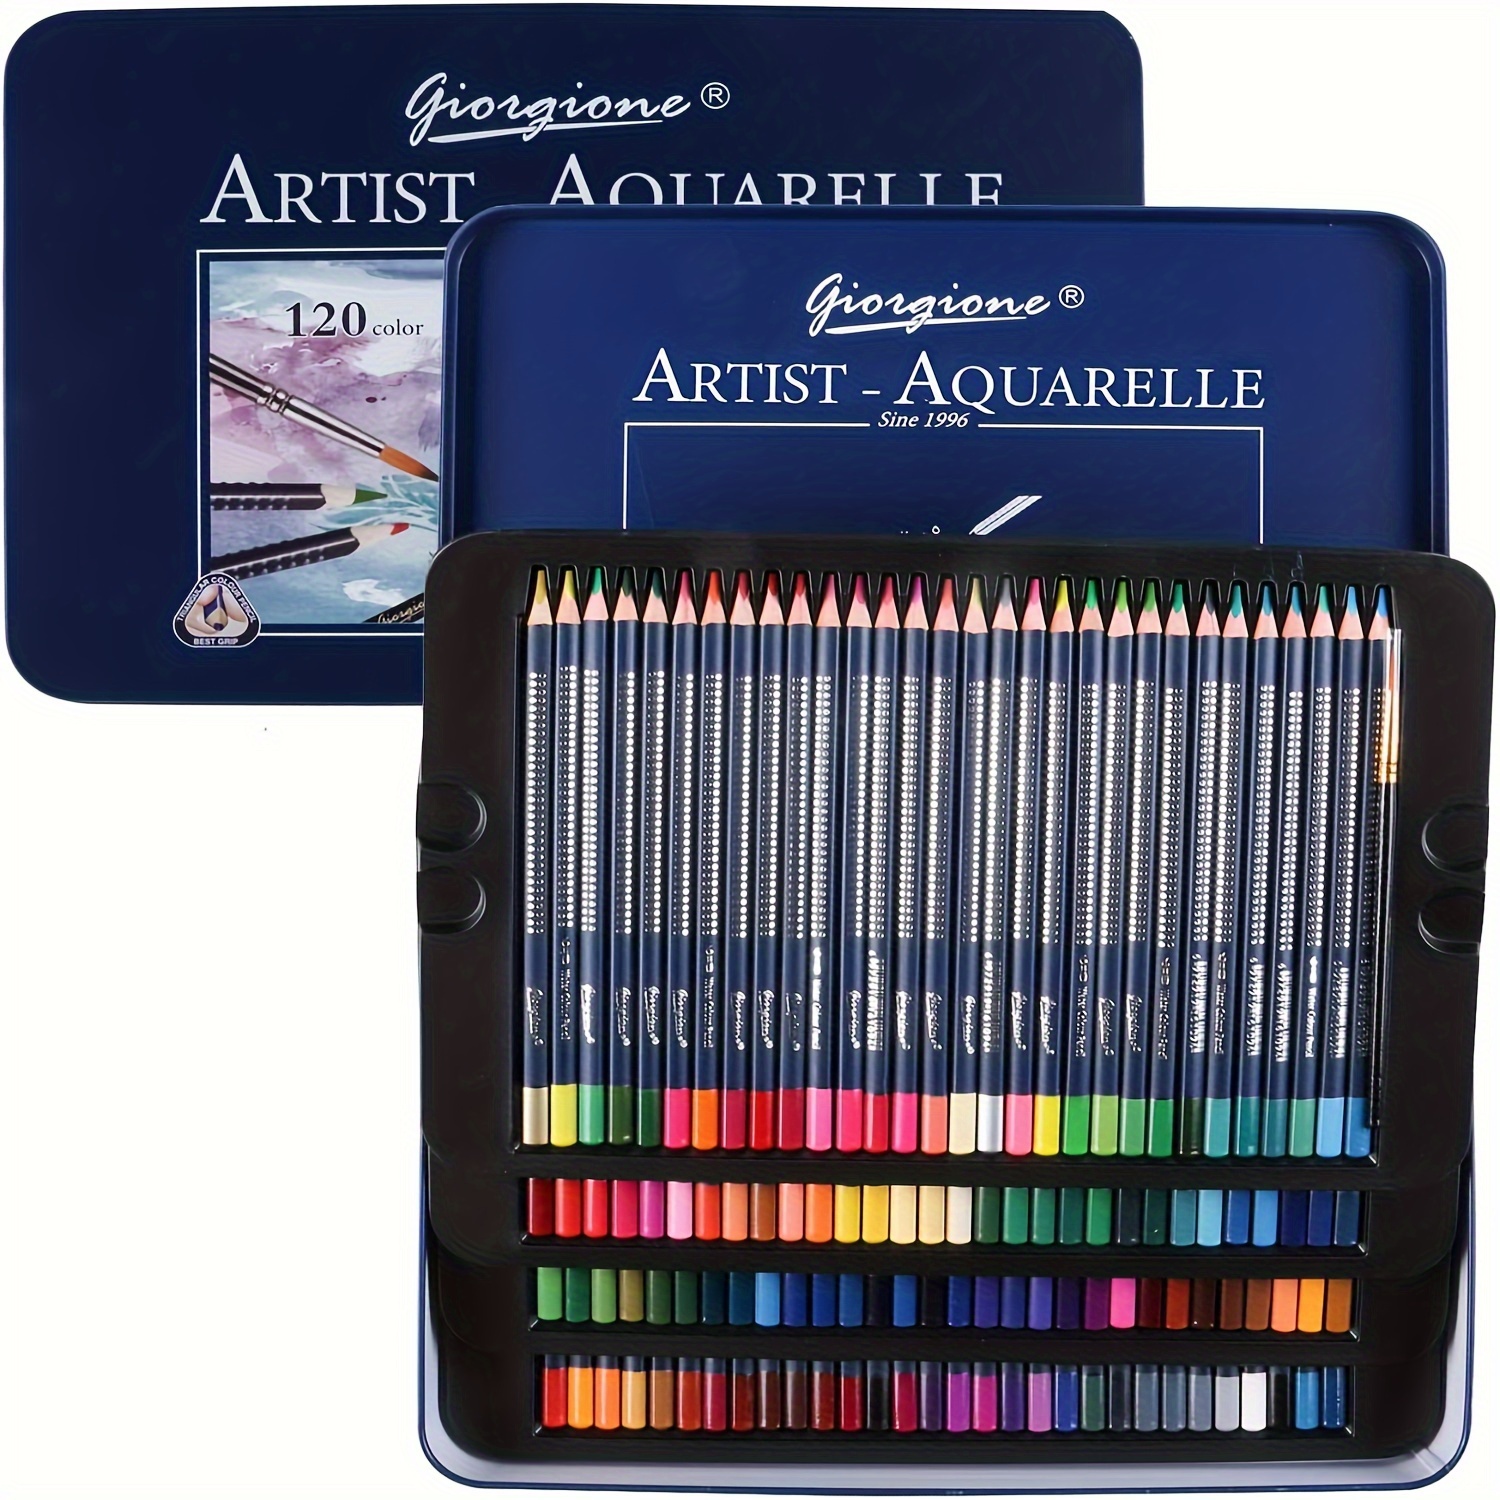 Wholesale Brutfuner Professional Oil Color Watercolor Colored Pencils Set  Of 48/72/120/160/180 For Sketching And Coloring Ideal For School Art  Supplies From Dou08, $20.98